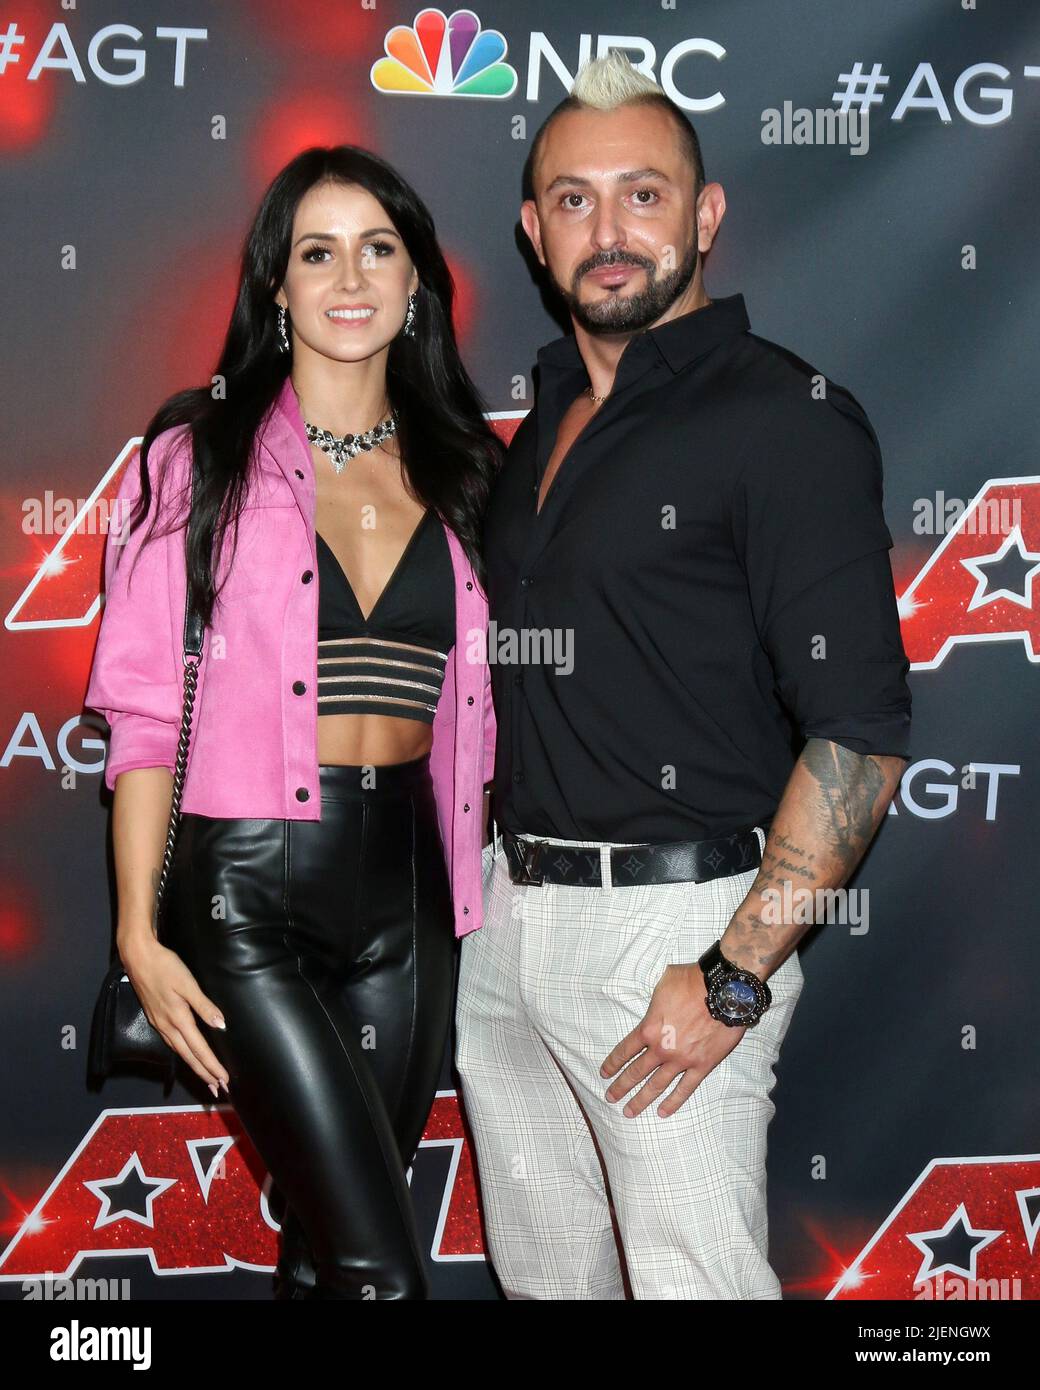 America's Got Talent Live Show Red Carpet at the Dolby Theater on September 7, 2021 in Los Angeles, CA Featuring: Anna Silva, Alfredo Silva, Deadly Games Where: Los Angeles, California, United States When: 08 Sep 2021 Credit: Nicky Nelson/WENN.com Stock Photo